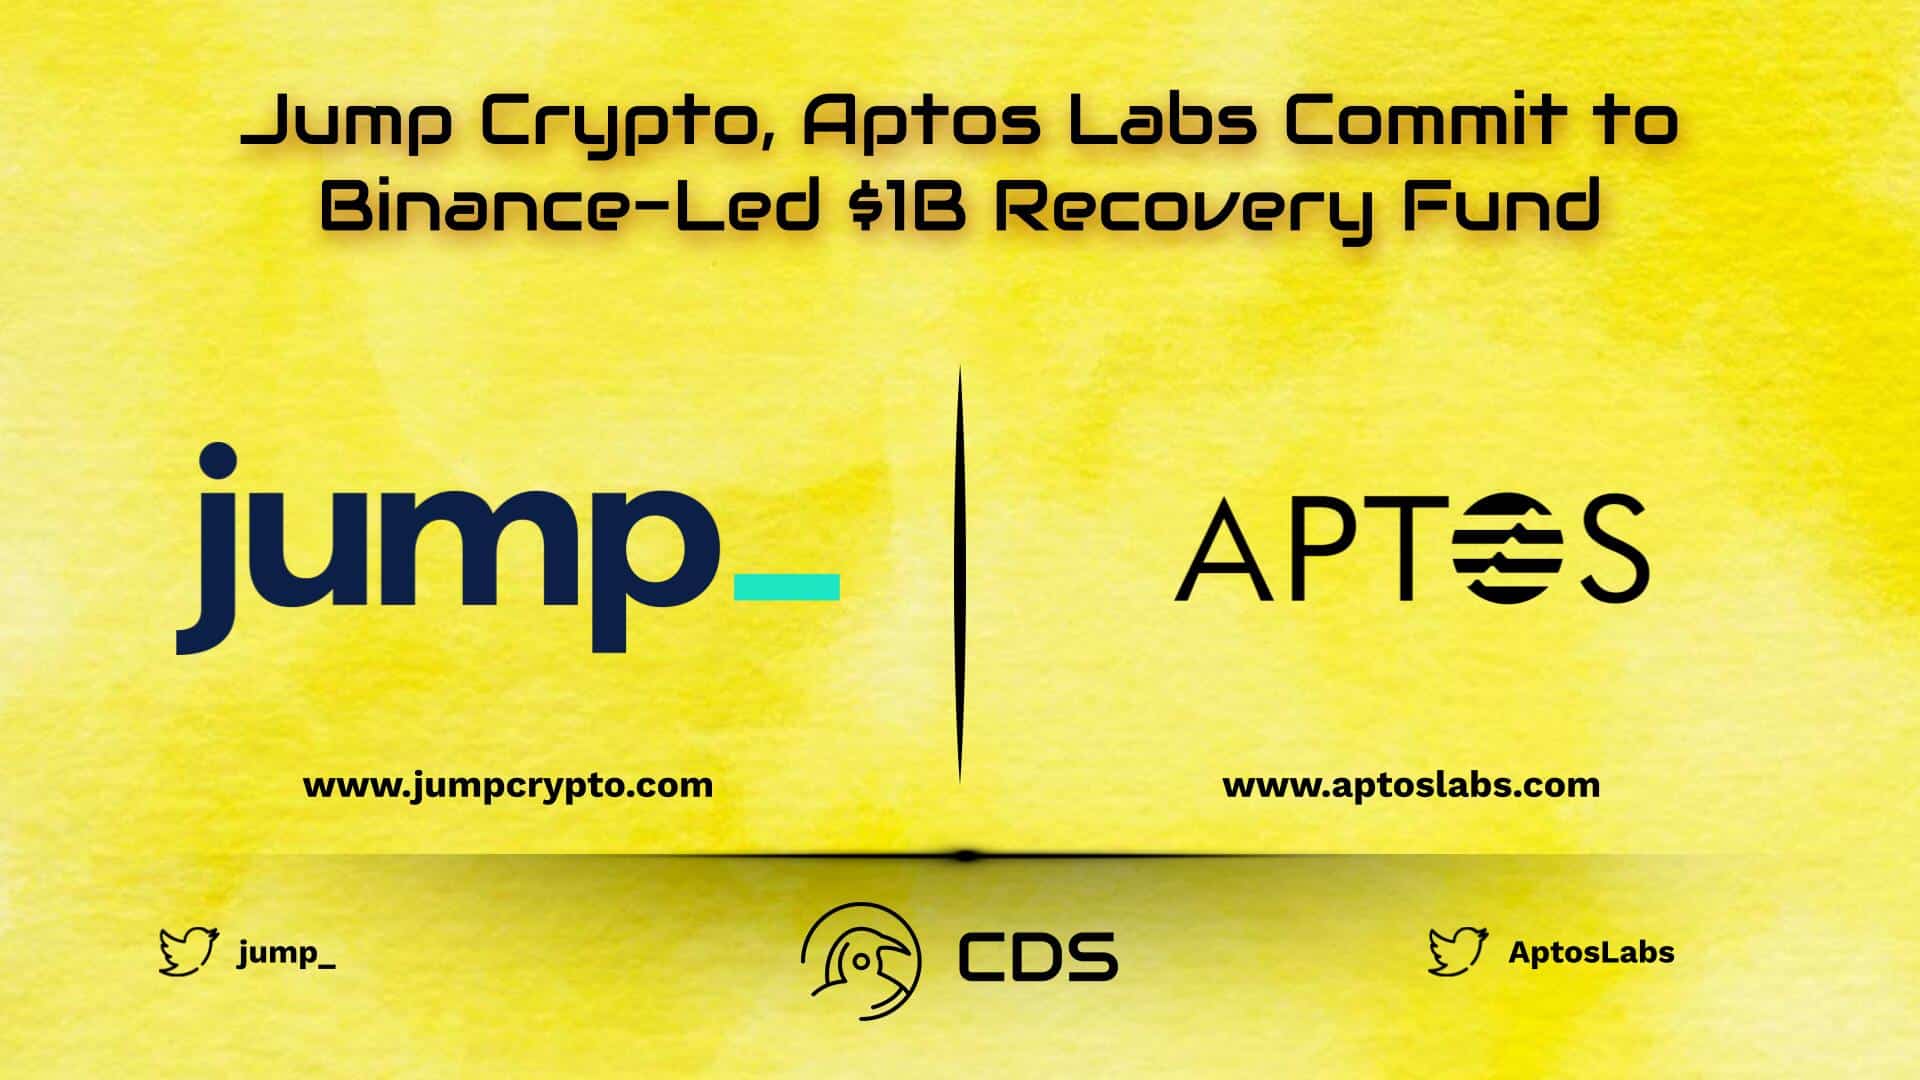 Jump Crypto, Aptos Labs Commit to Binance-Led $1B Recovery Fund